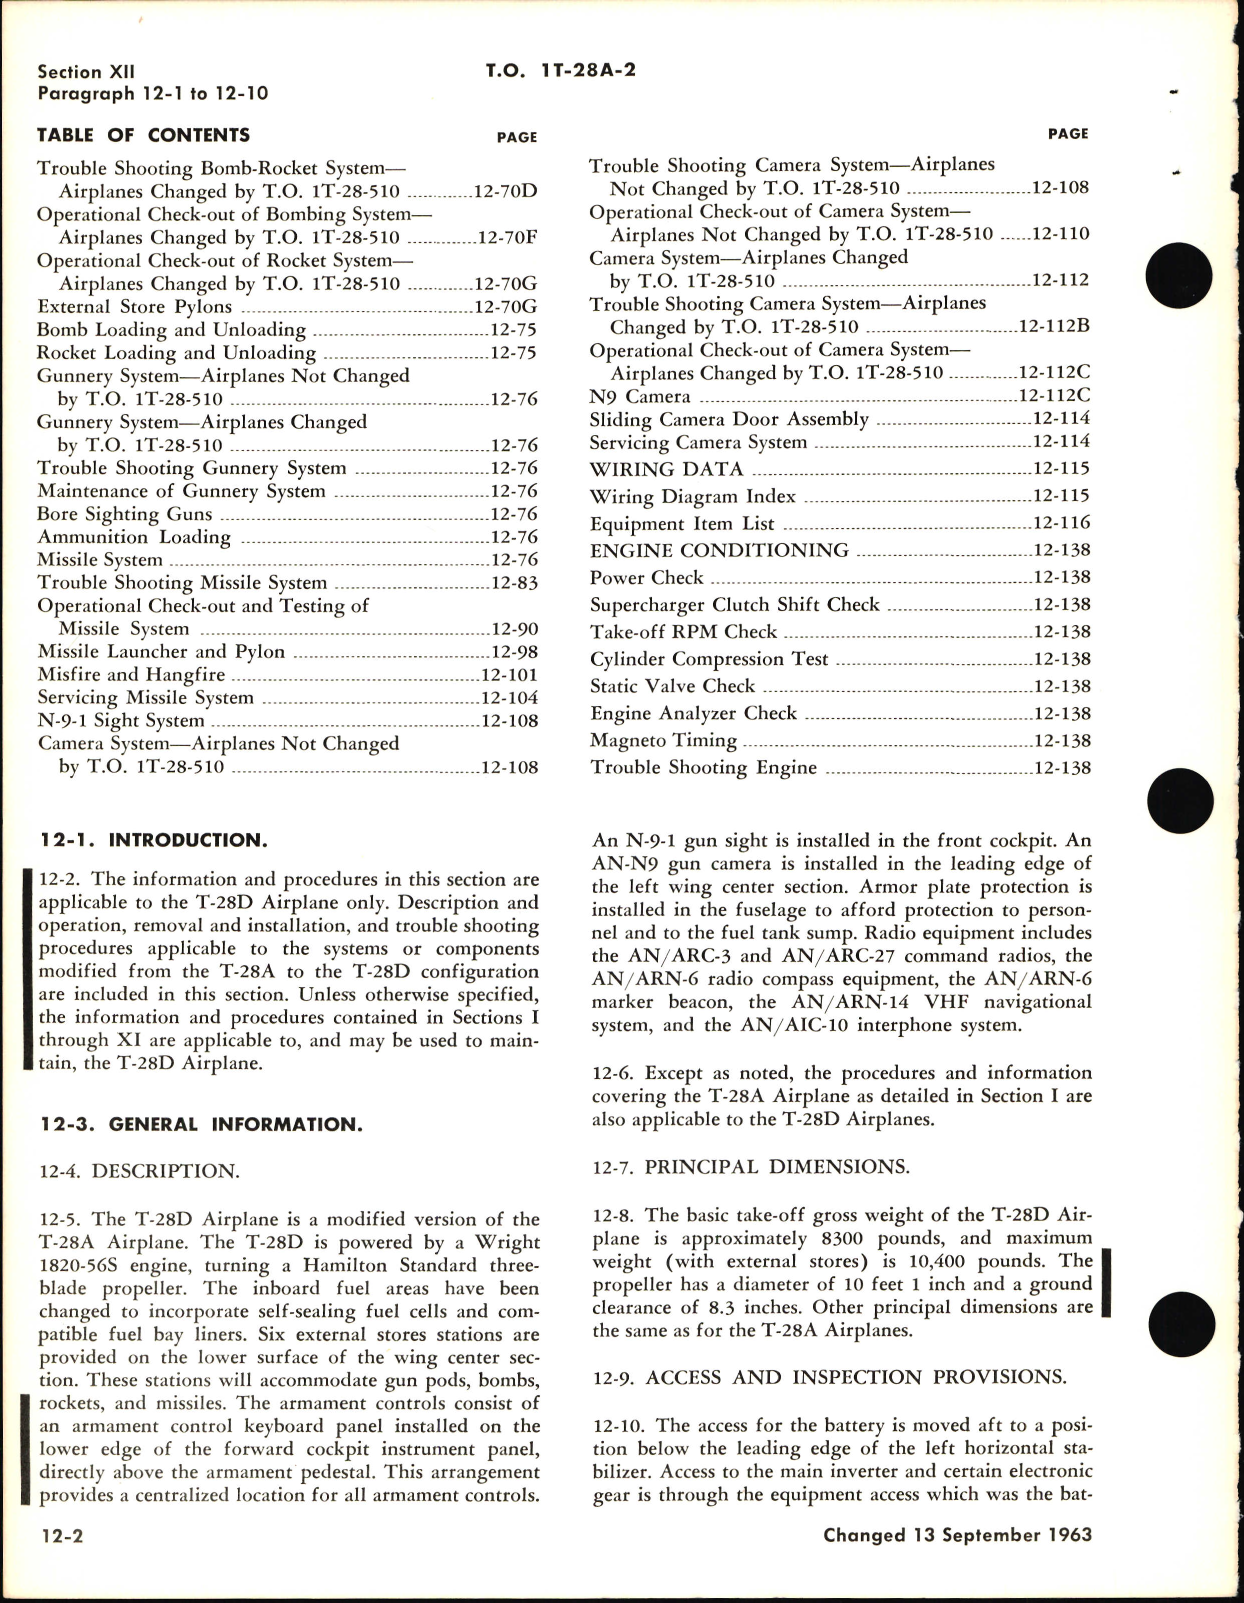 Sample page 8 from AirCorps Library document: Maintenance Manual for T-28A and T-28D